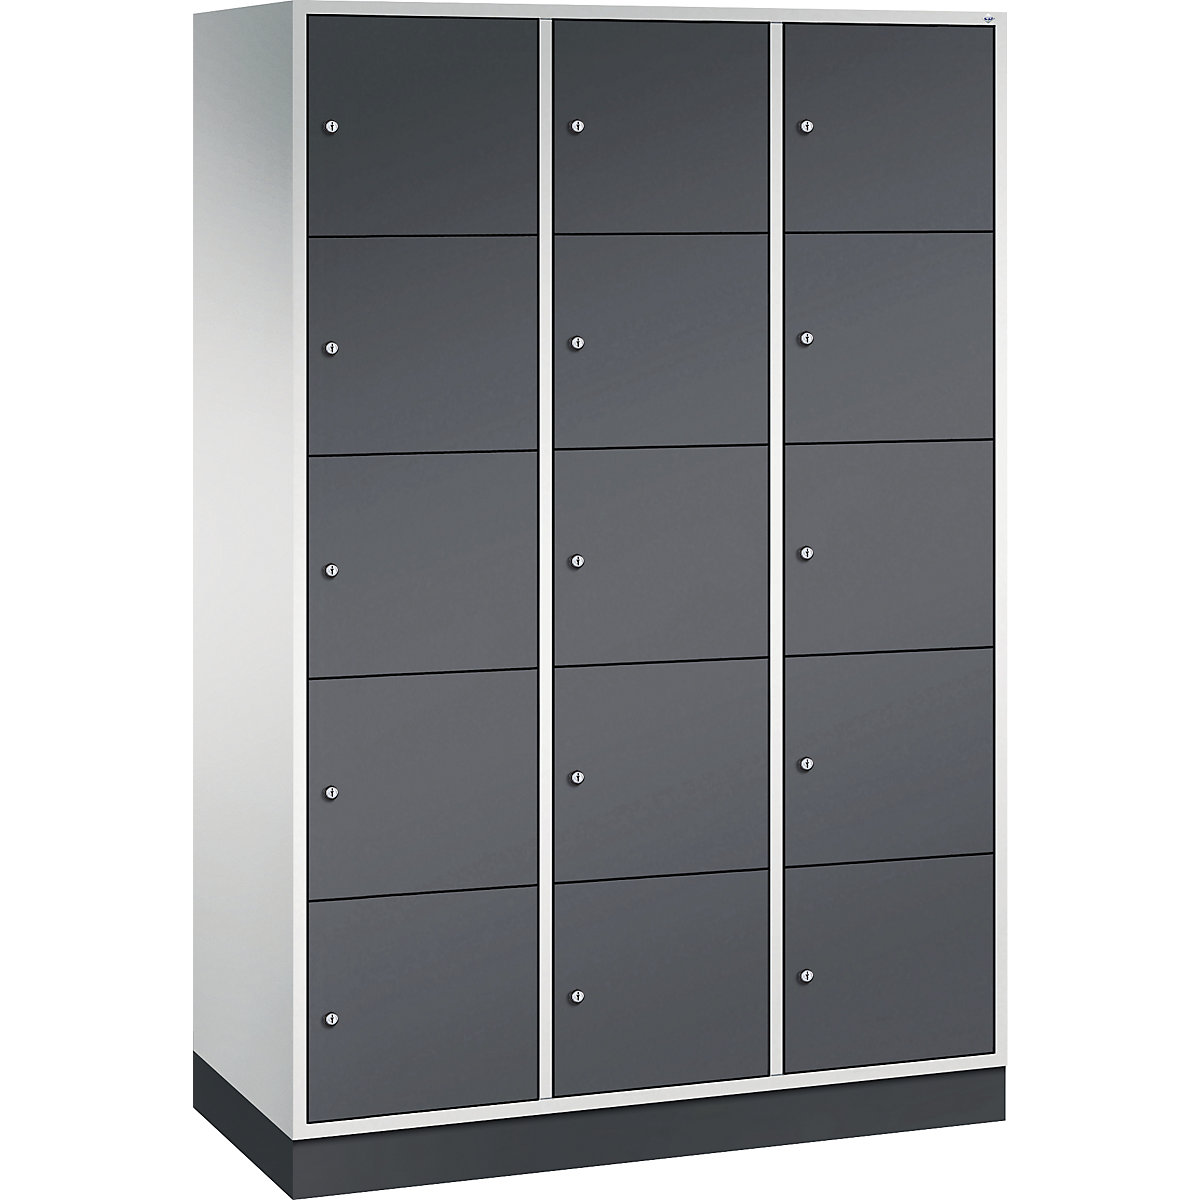 INTRO steel compartment locker, compartment height 345 mm – C+P, WxD 1220 x 500 mm, 15 compartments, light grey body, black grey doors